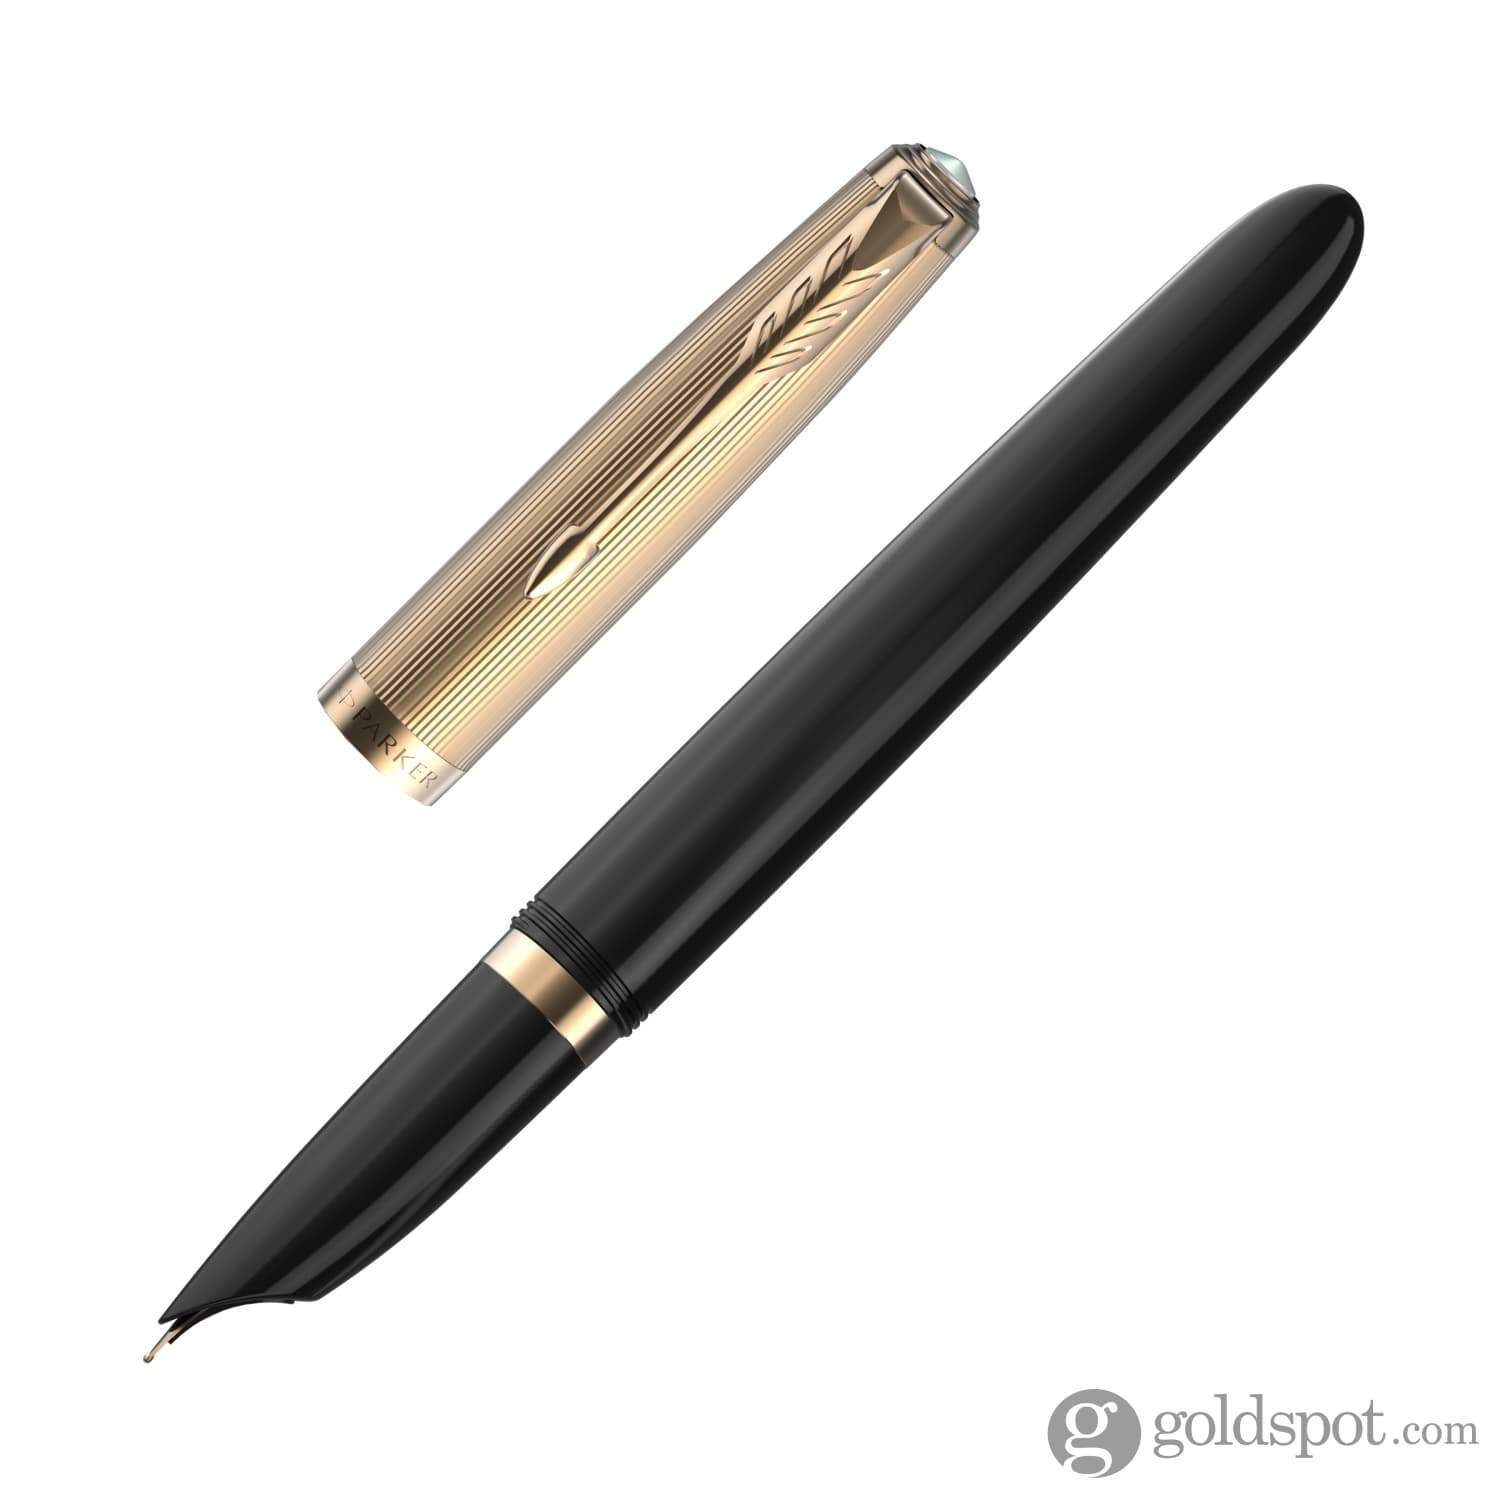 51 Fountain in Black with Trim - 18K Gold - Goldspot Pens